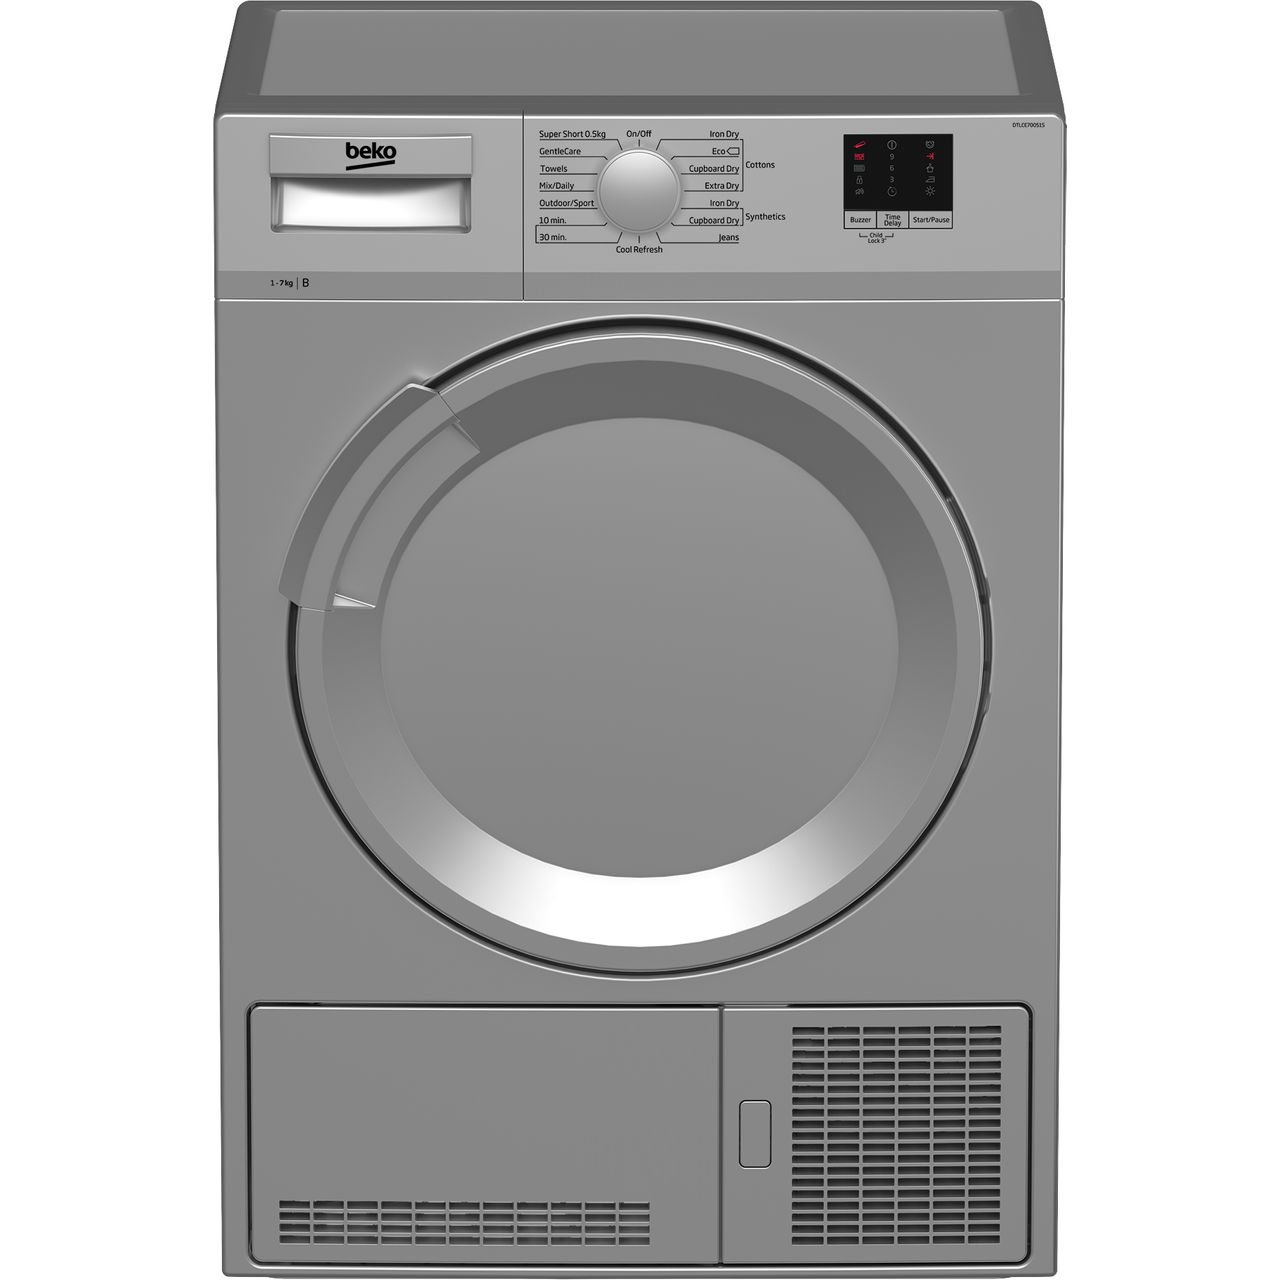 Beko DTLCE70051S 7Kg Condenser Tumble Dryer Review